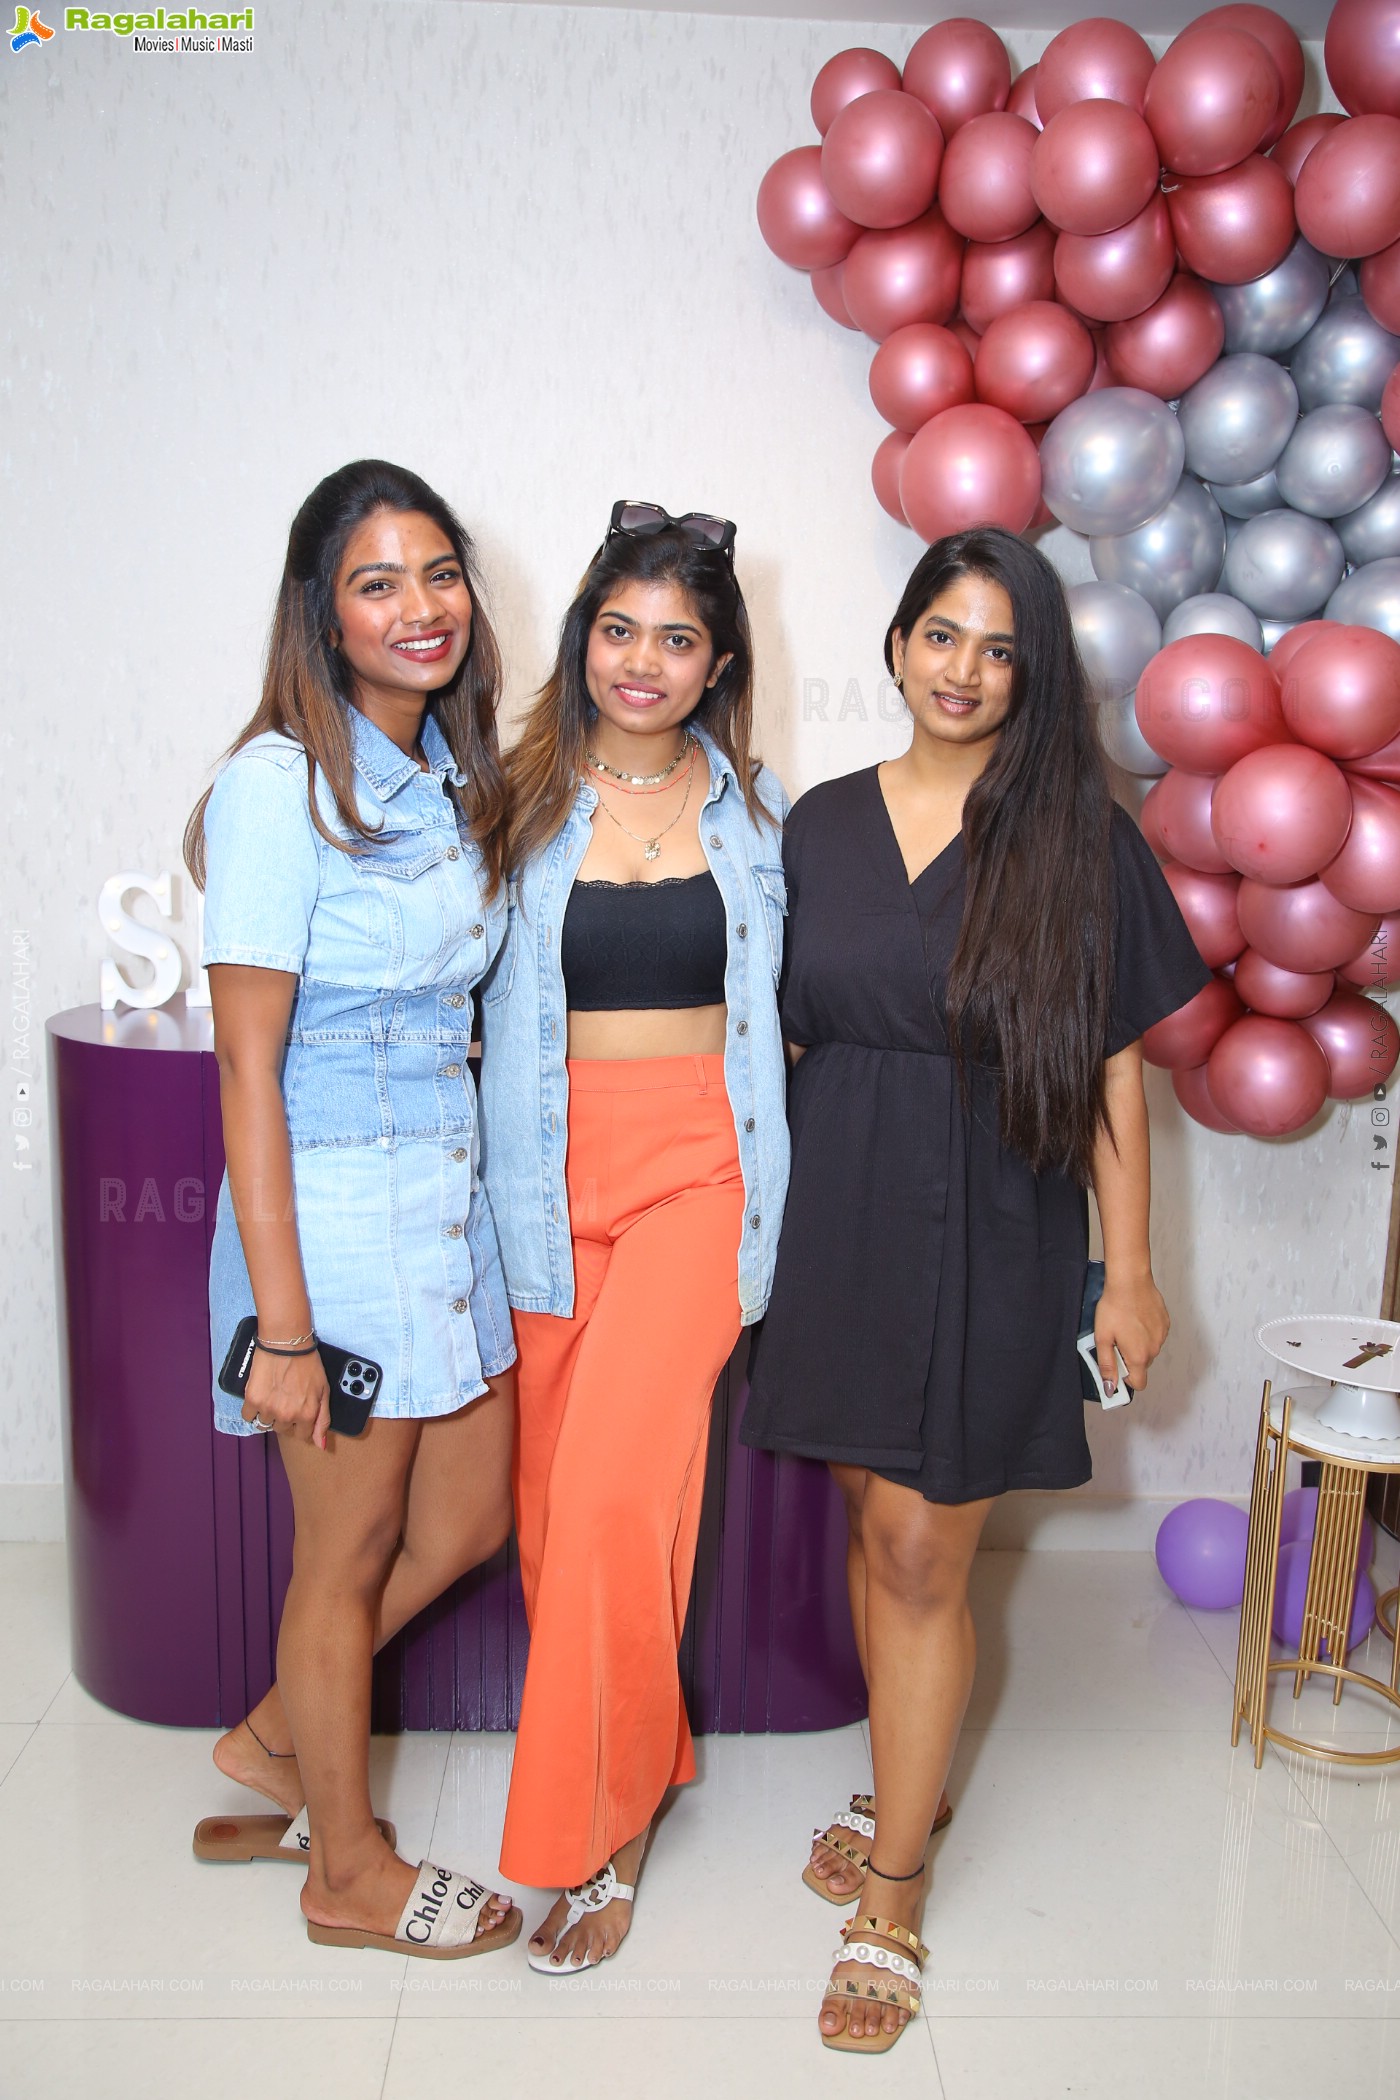 S'NAILS Unisex Salon - Pause to Pamper Launch